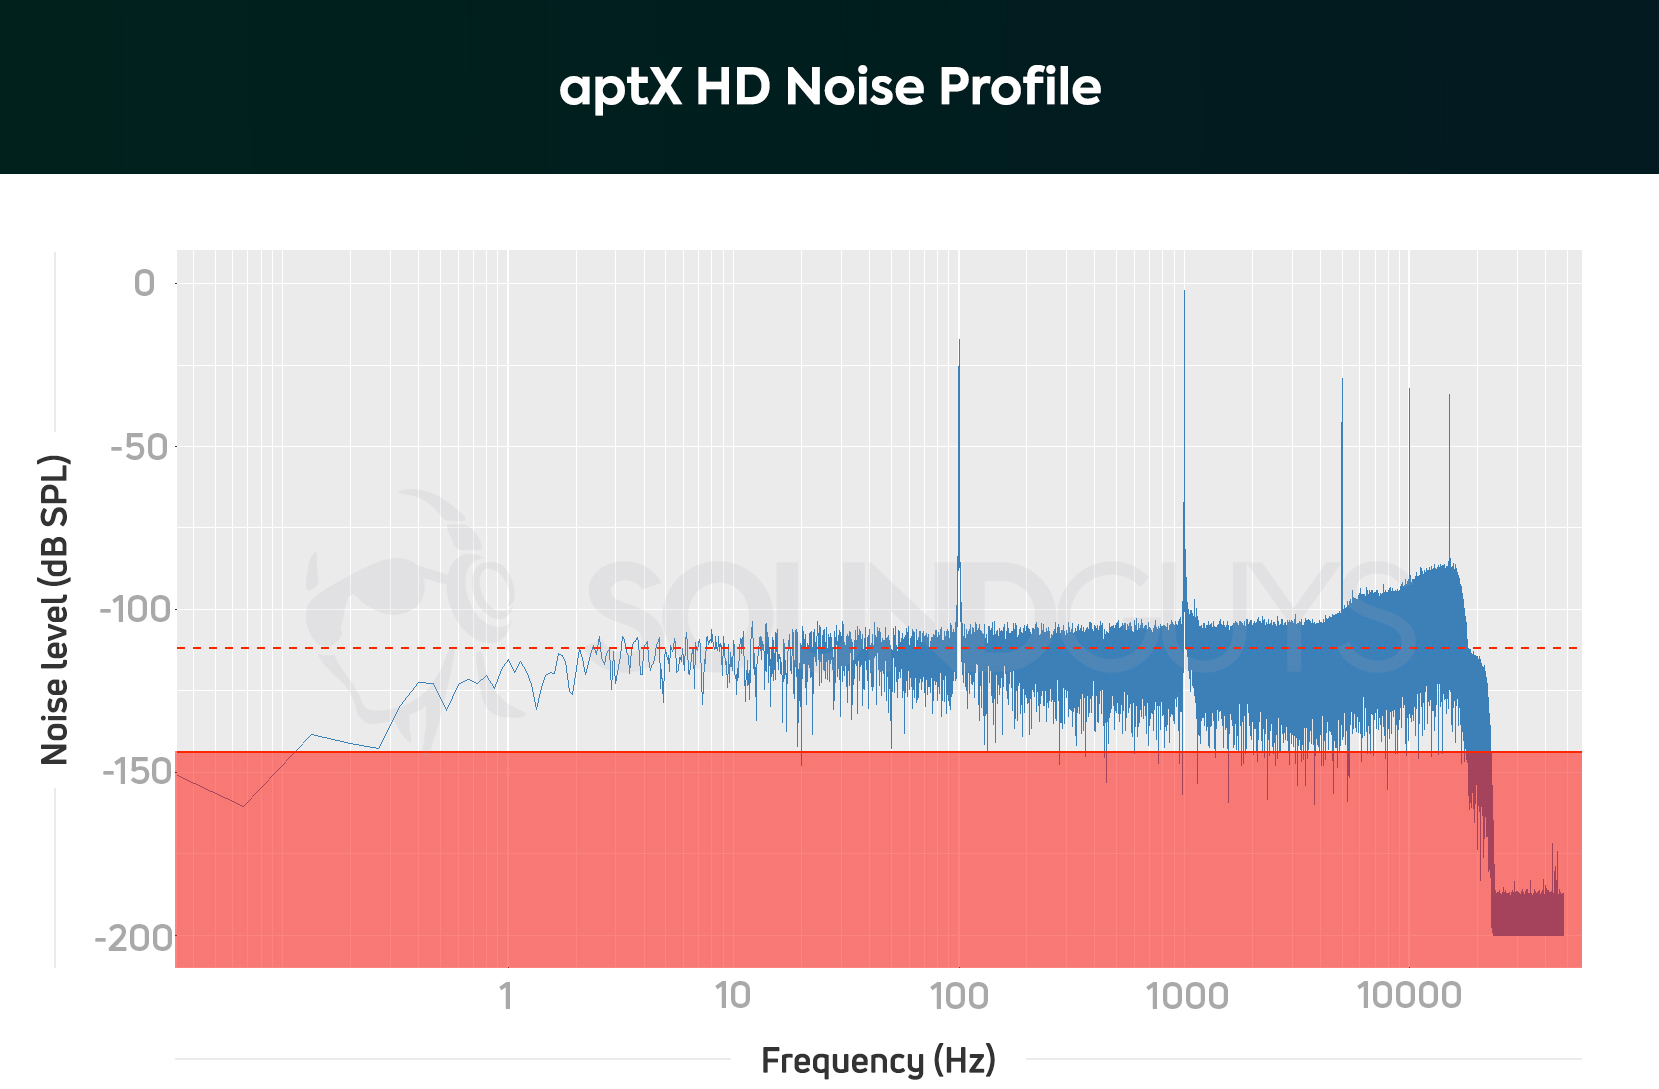 A chart showing the noise profile of aptX HD.